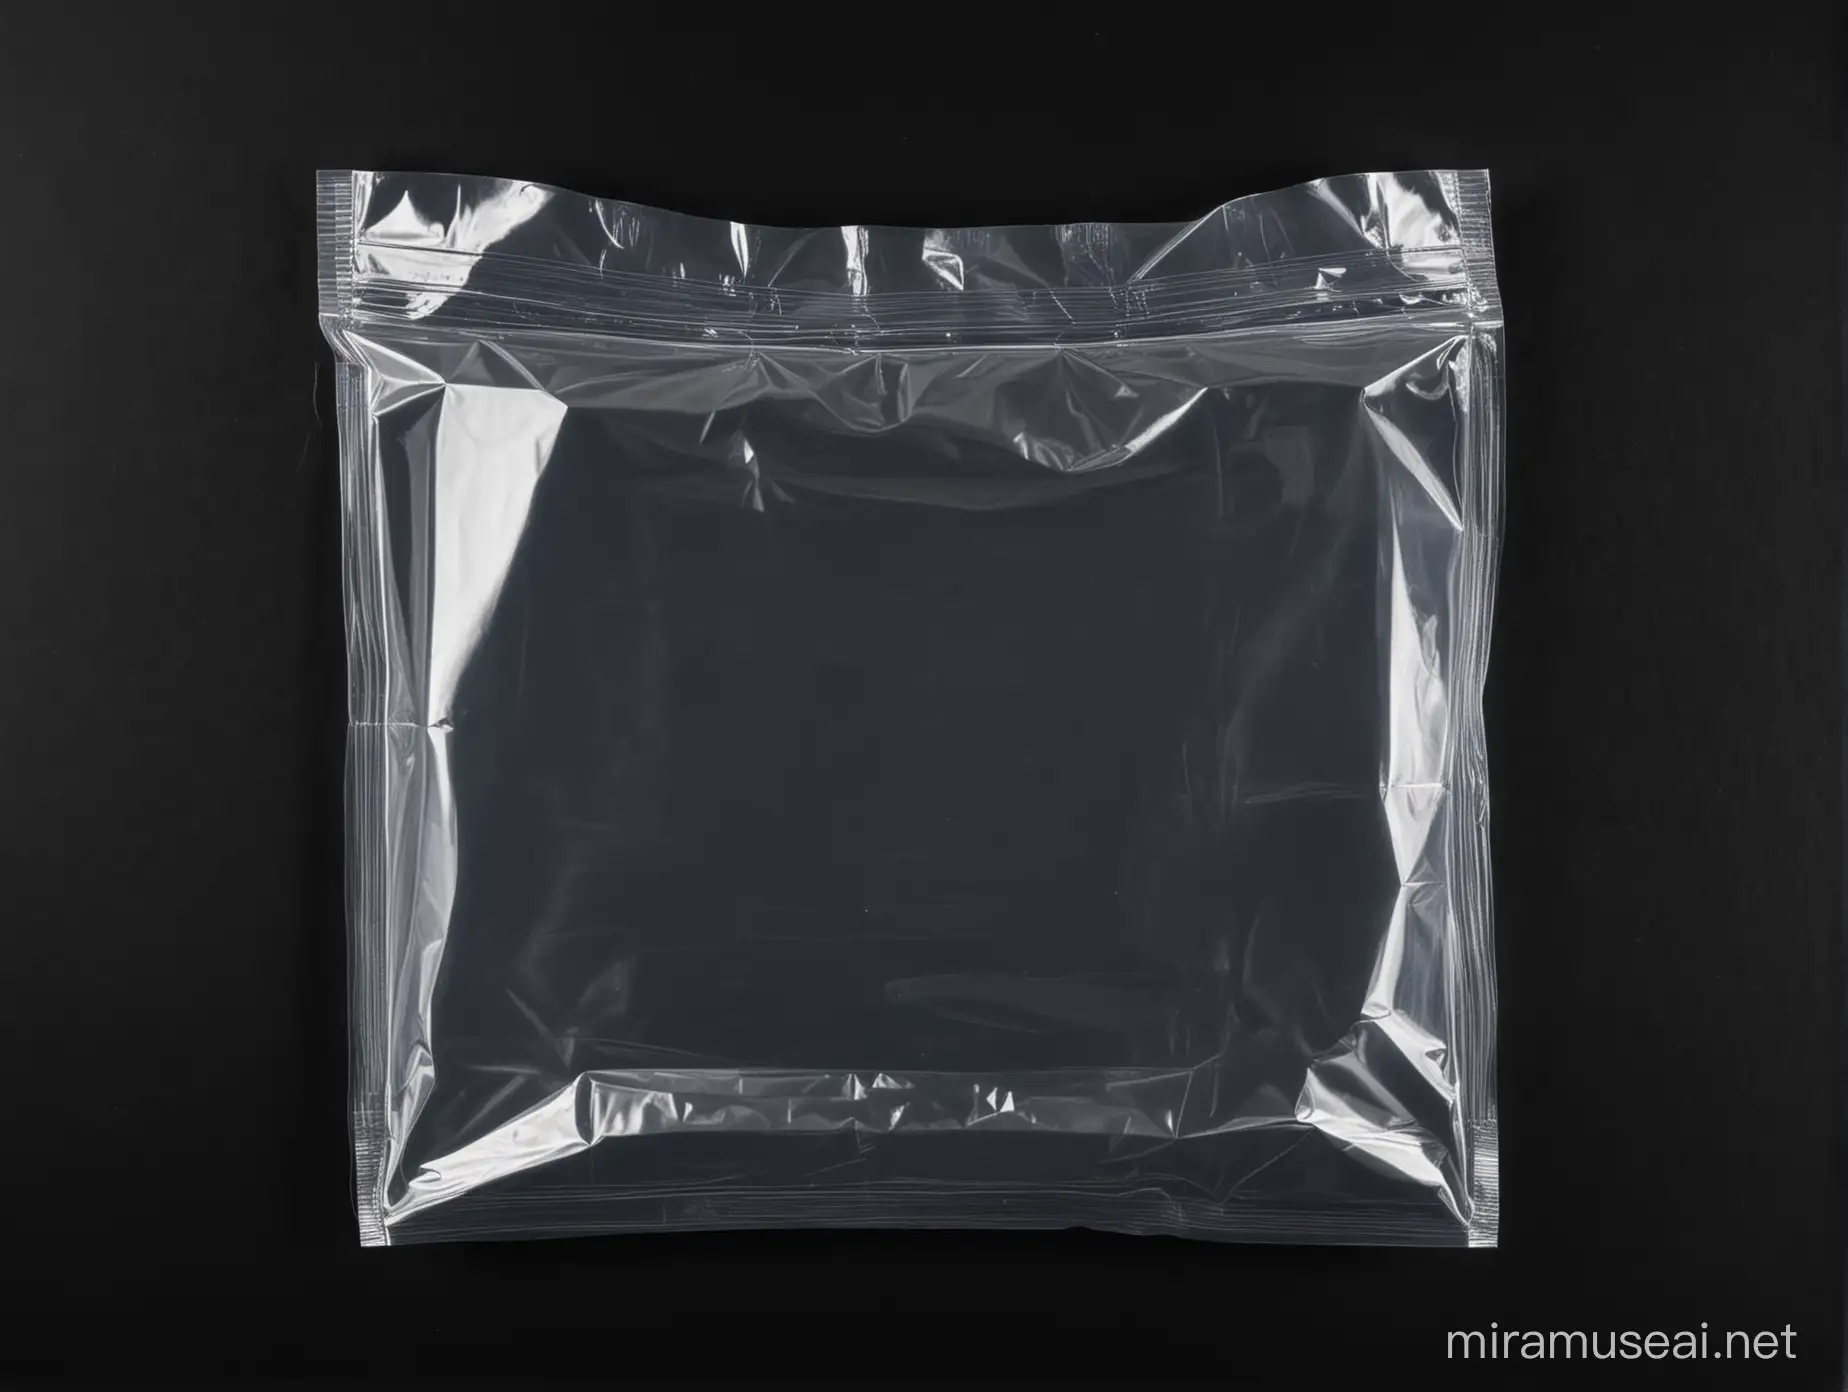  clear plastic bag on a black background. the plastic bag is the shape of a horizontally wide and vertically short rectangle.